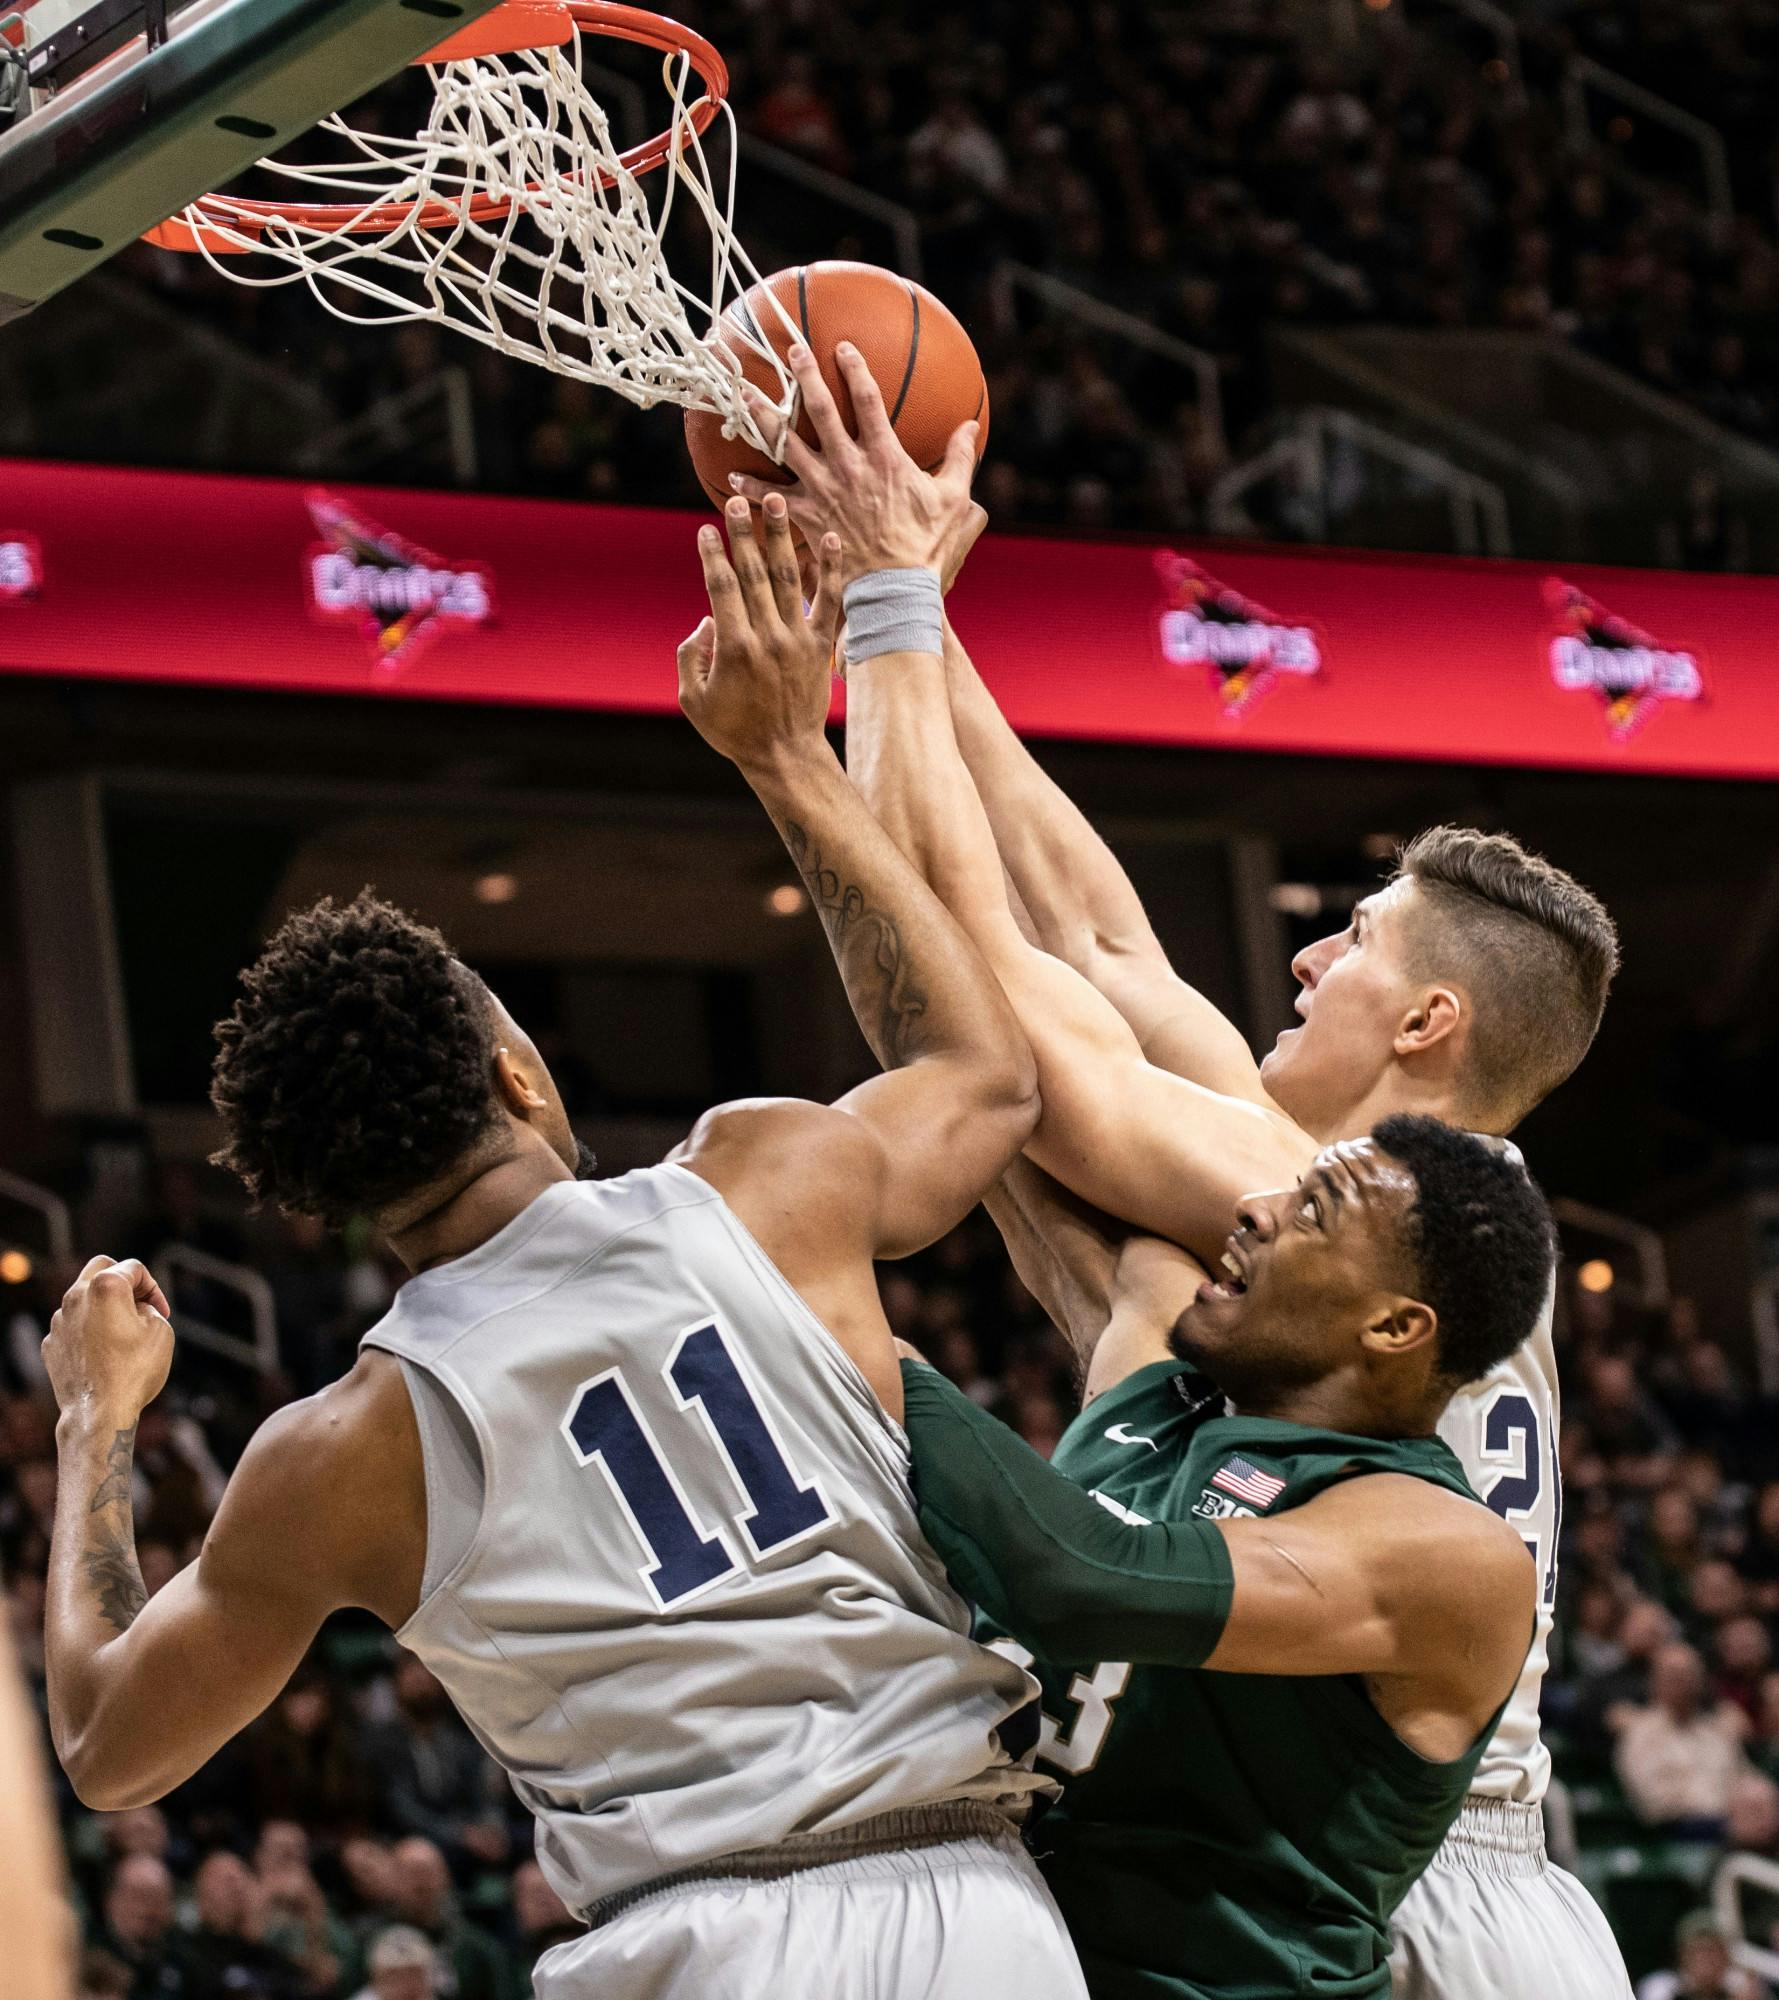 Forward Xavier Tillman fights for possession during a basketball game against Penn State at the Breslin Center on Feb. 4, 2020.